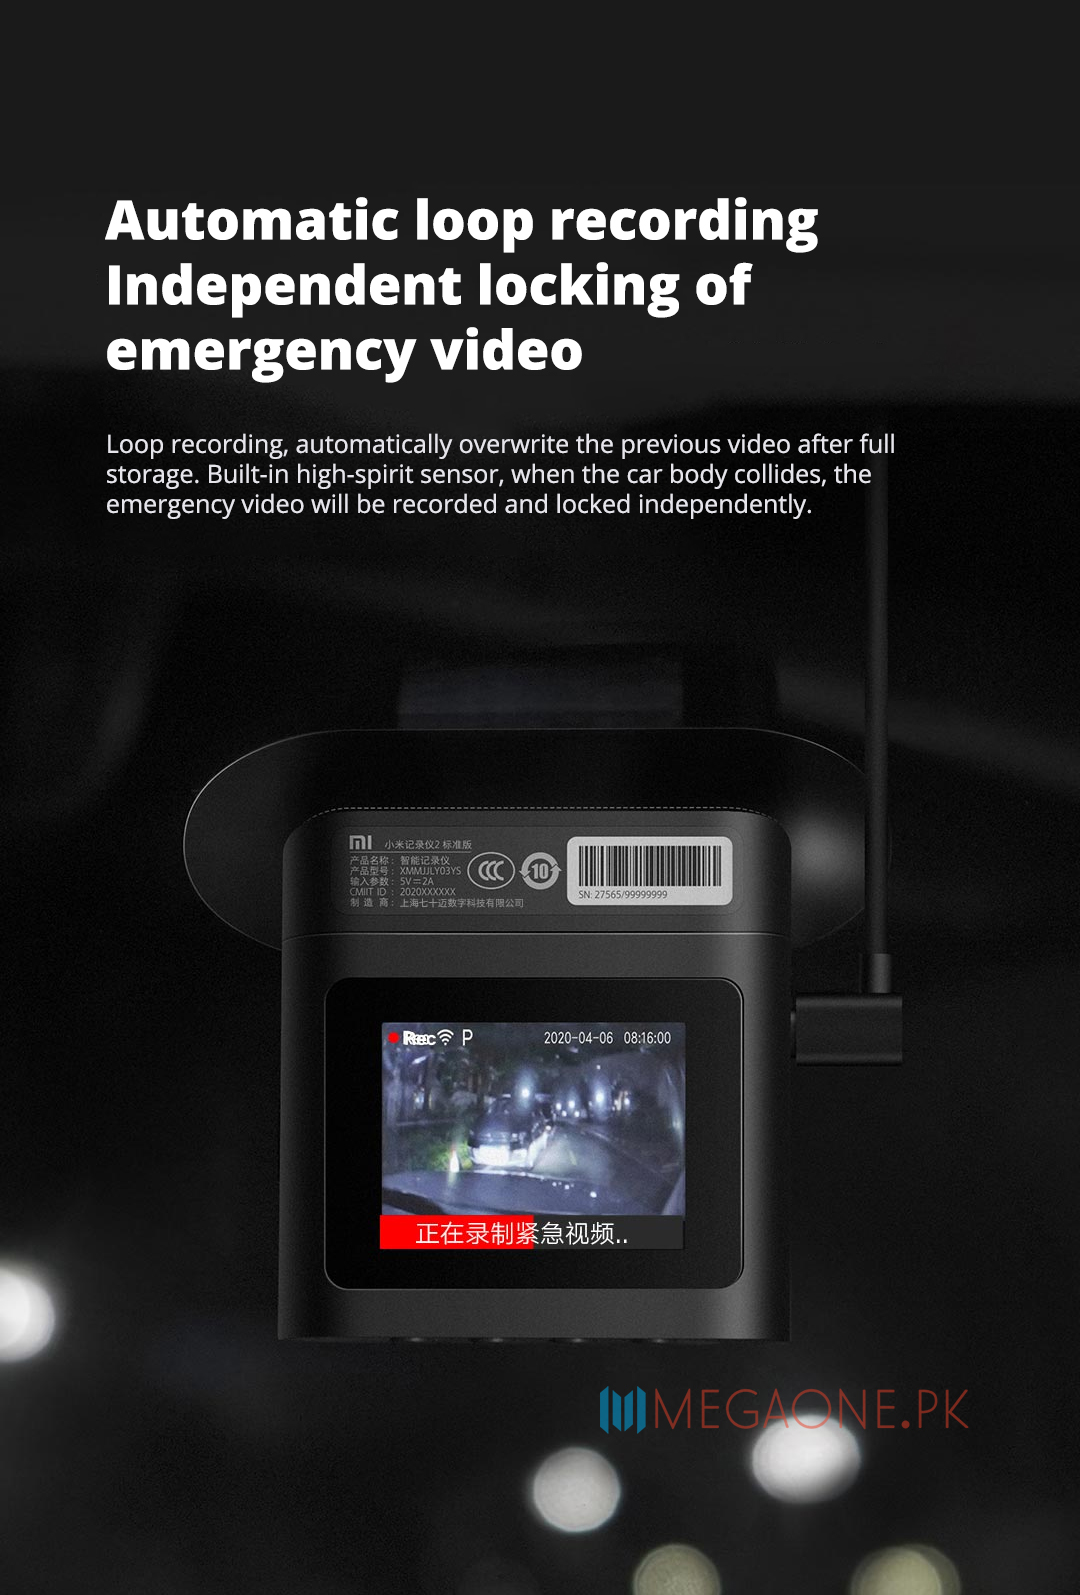 Loop recording, automatically overwrite the previous video after full storage. Built-in high-spirit sensor, when the car body collides, the emergency video will be recorded and locked independently.